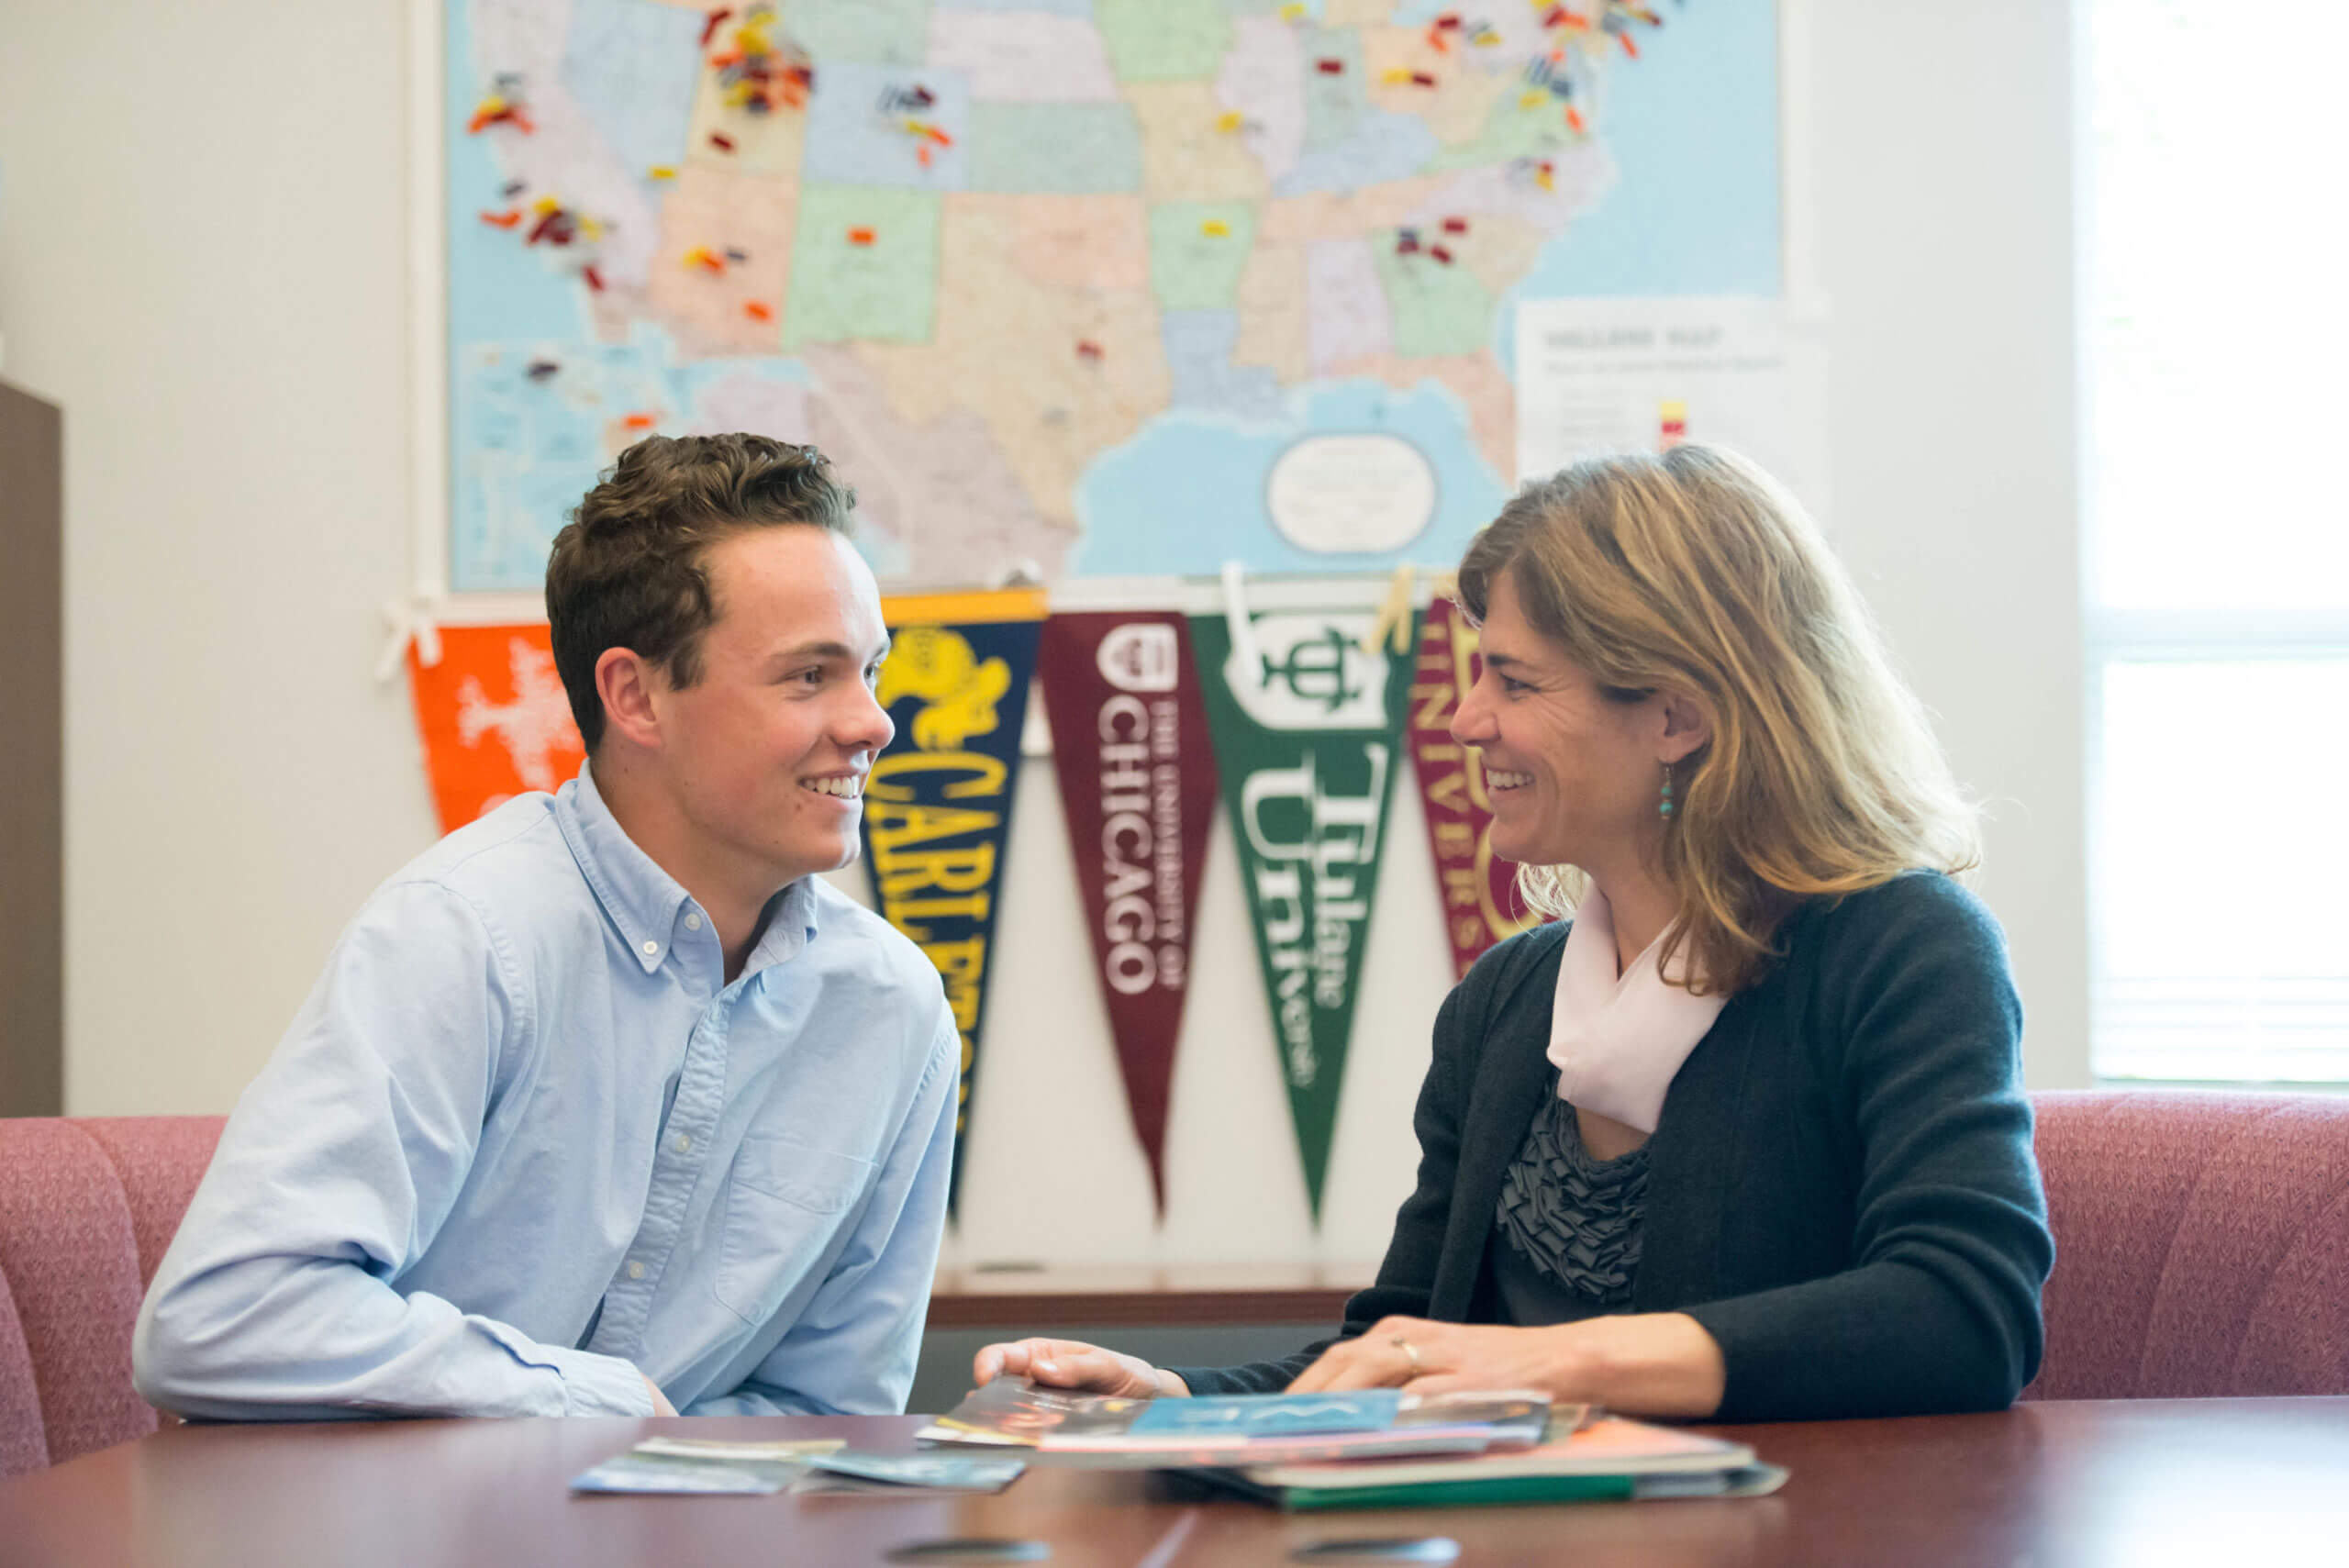 Waterford’s college counselors work one-on-one with students through every step of the college process.